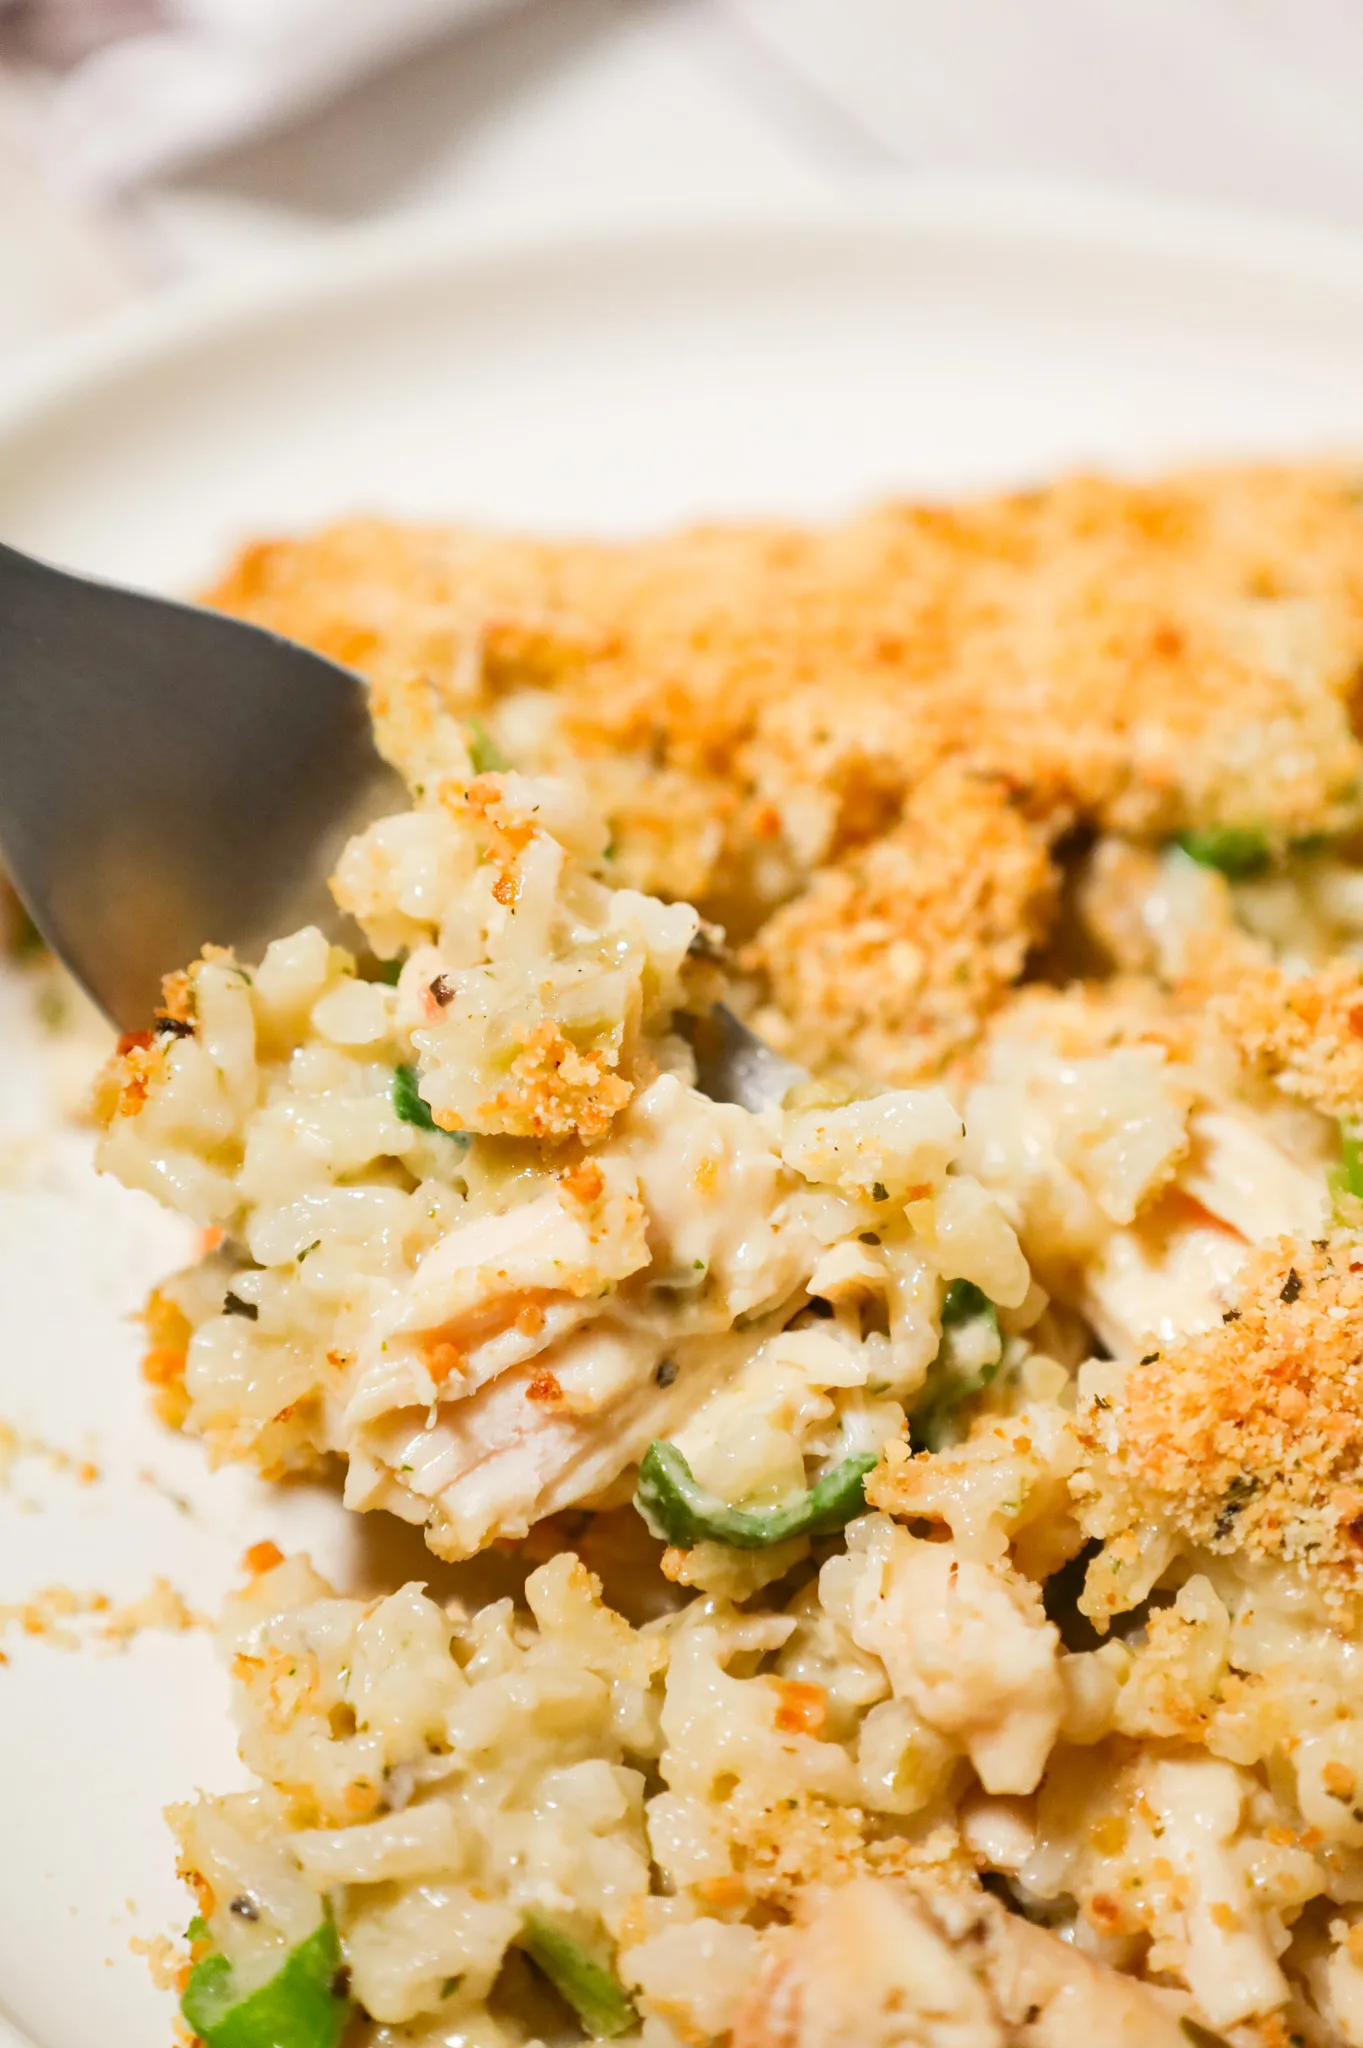 Old Fashioned Chicken and Rice Casserole - Fantabulosity